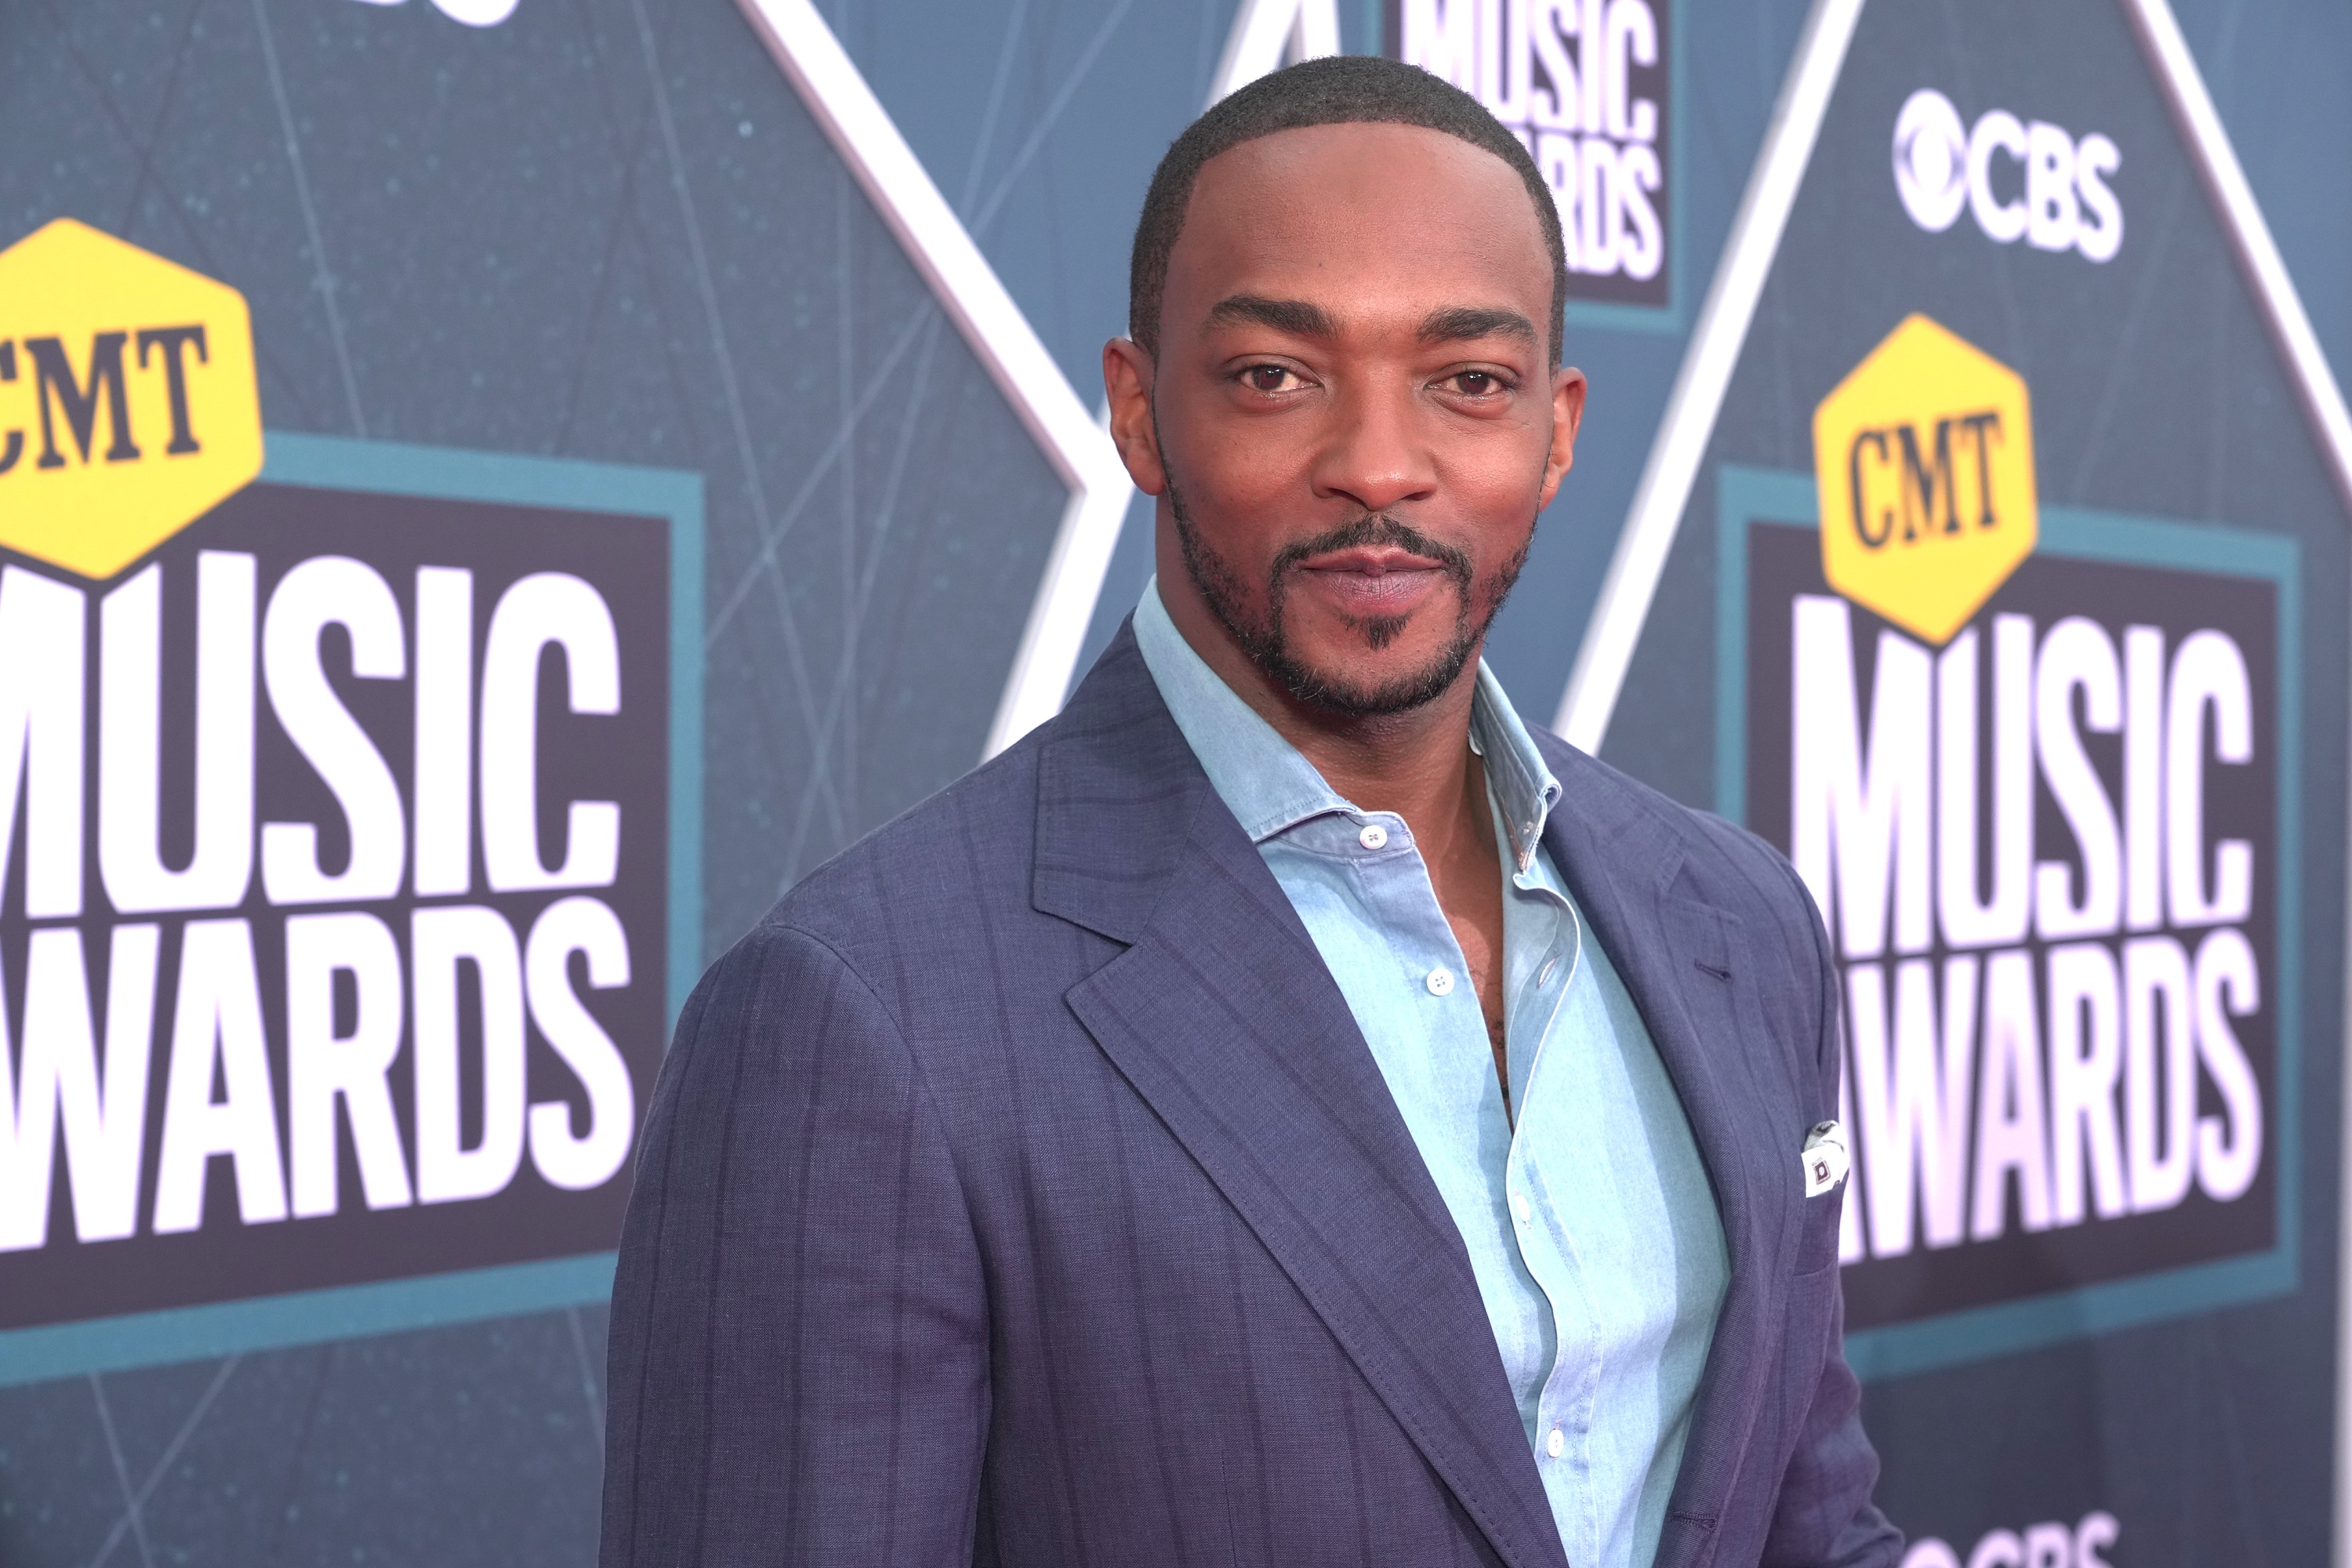 Anthony Mackie at the 2022 CMT Awards